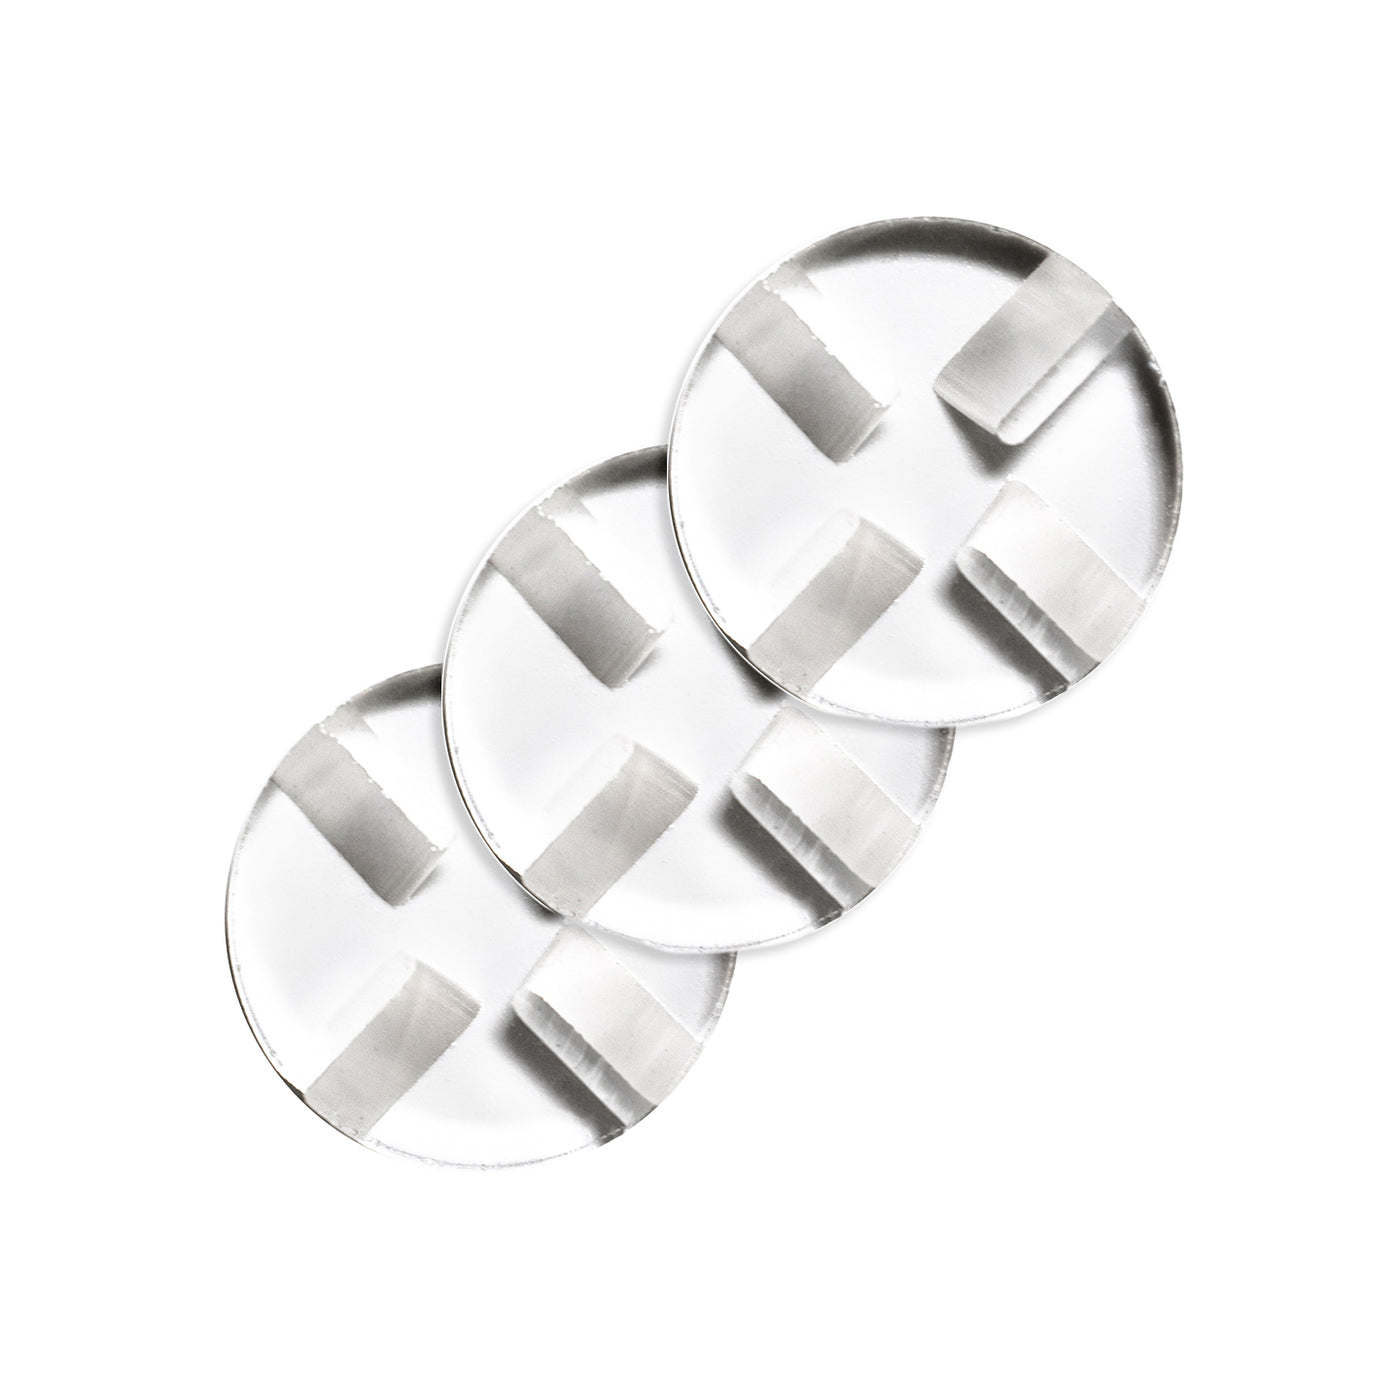 Turbine Disk Diffusers (3 Pack)